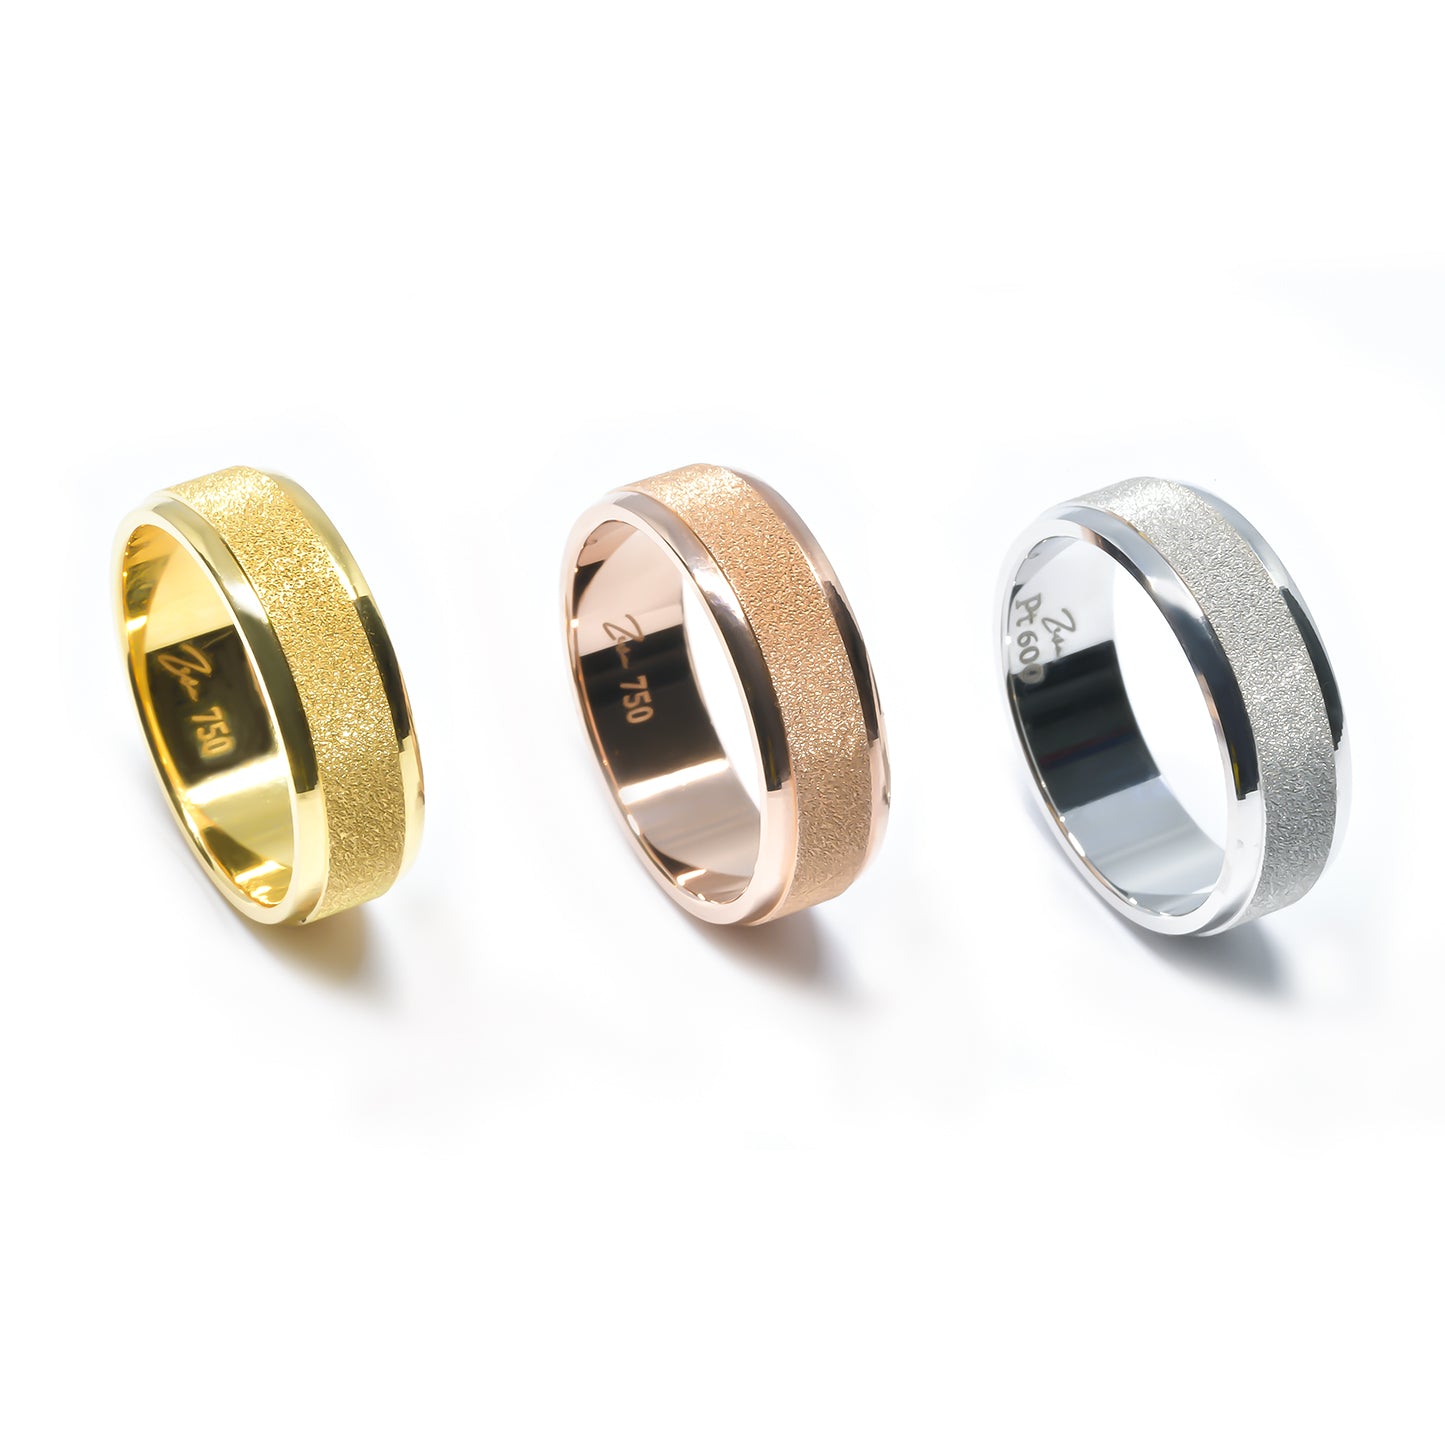 Ring EARTH IS ROUND 6mm yellow gold 18k 750